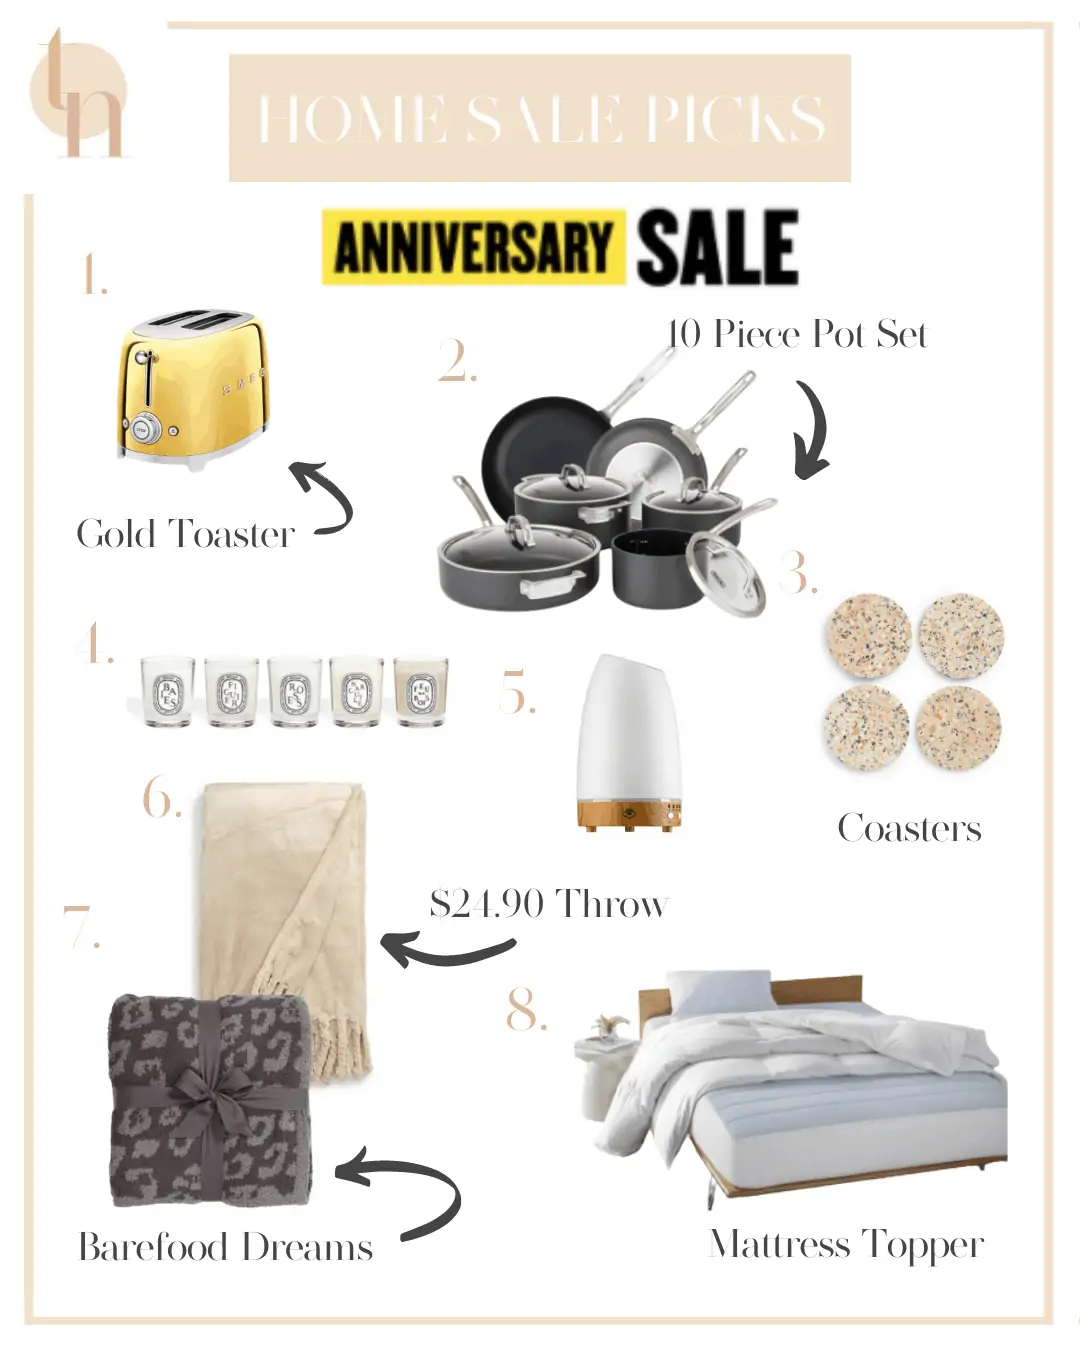 Nordstrom Anniversary Sale by popular Dallas life and style blog, Glamorous Versatility: collage image of Bliss Plush Throw, Barefoot Dreams Animal Print Blanket, Serene house Diffuser, Smeg Gold Toaster, Viking 10 piece nonstick set, Viking Cast Iron Griddle, and Mattress Pad.